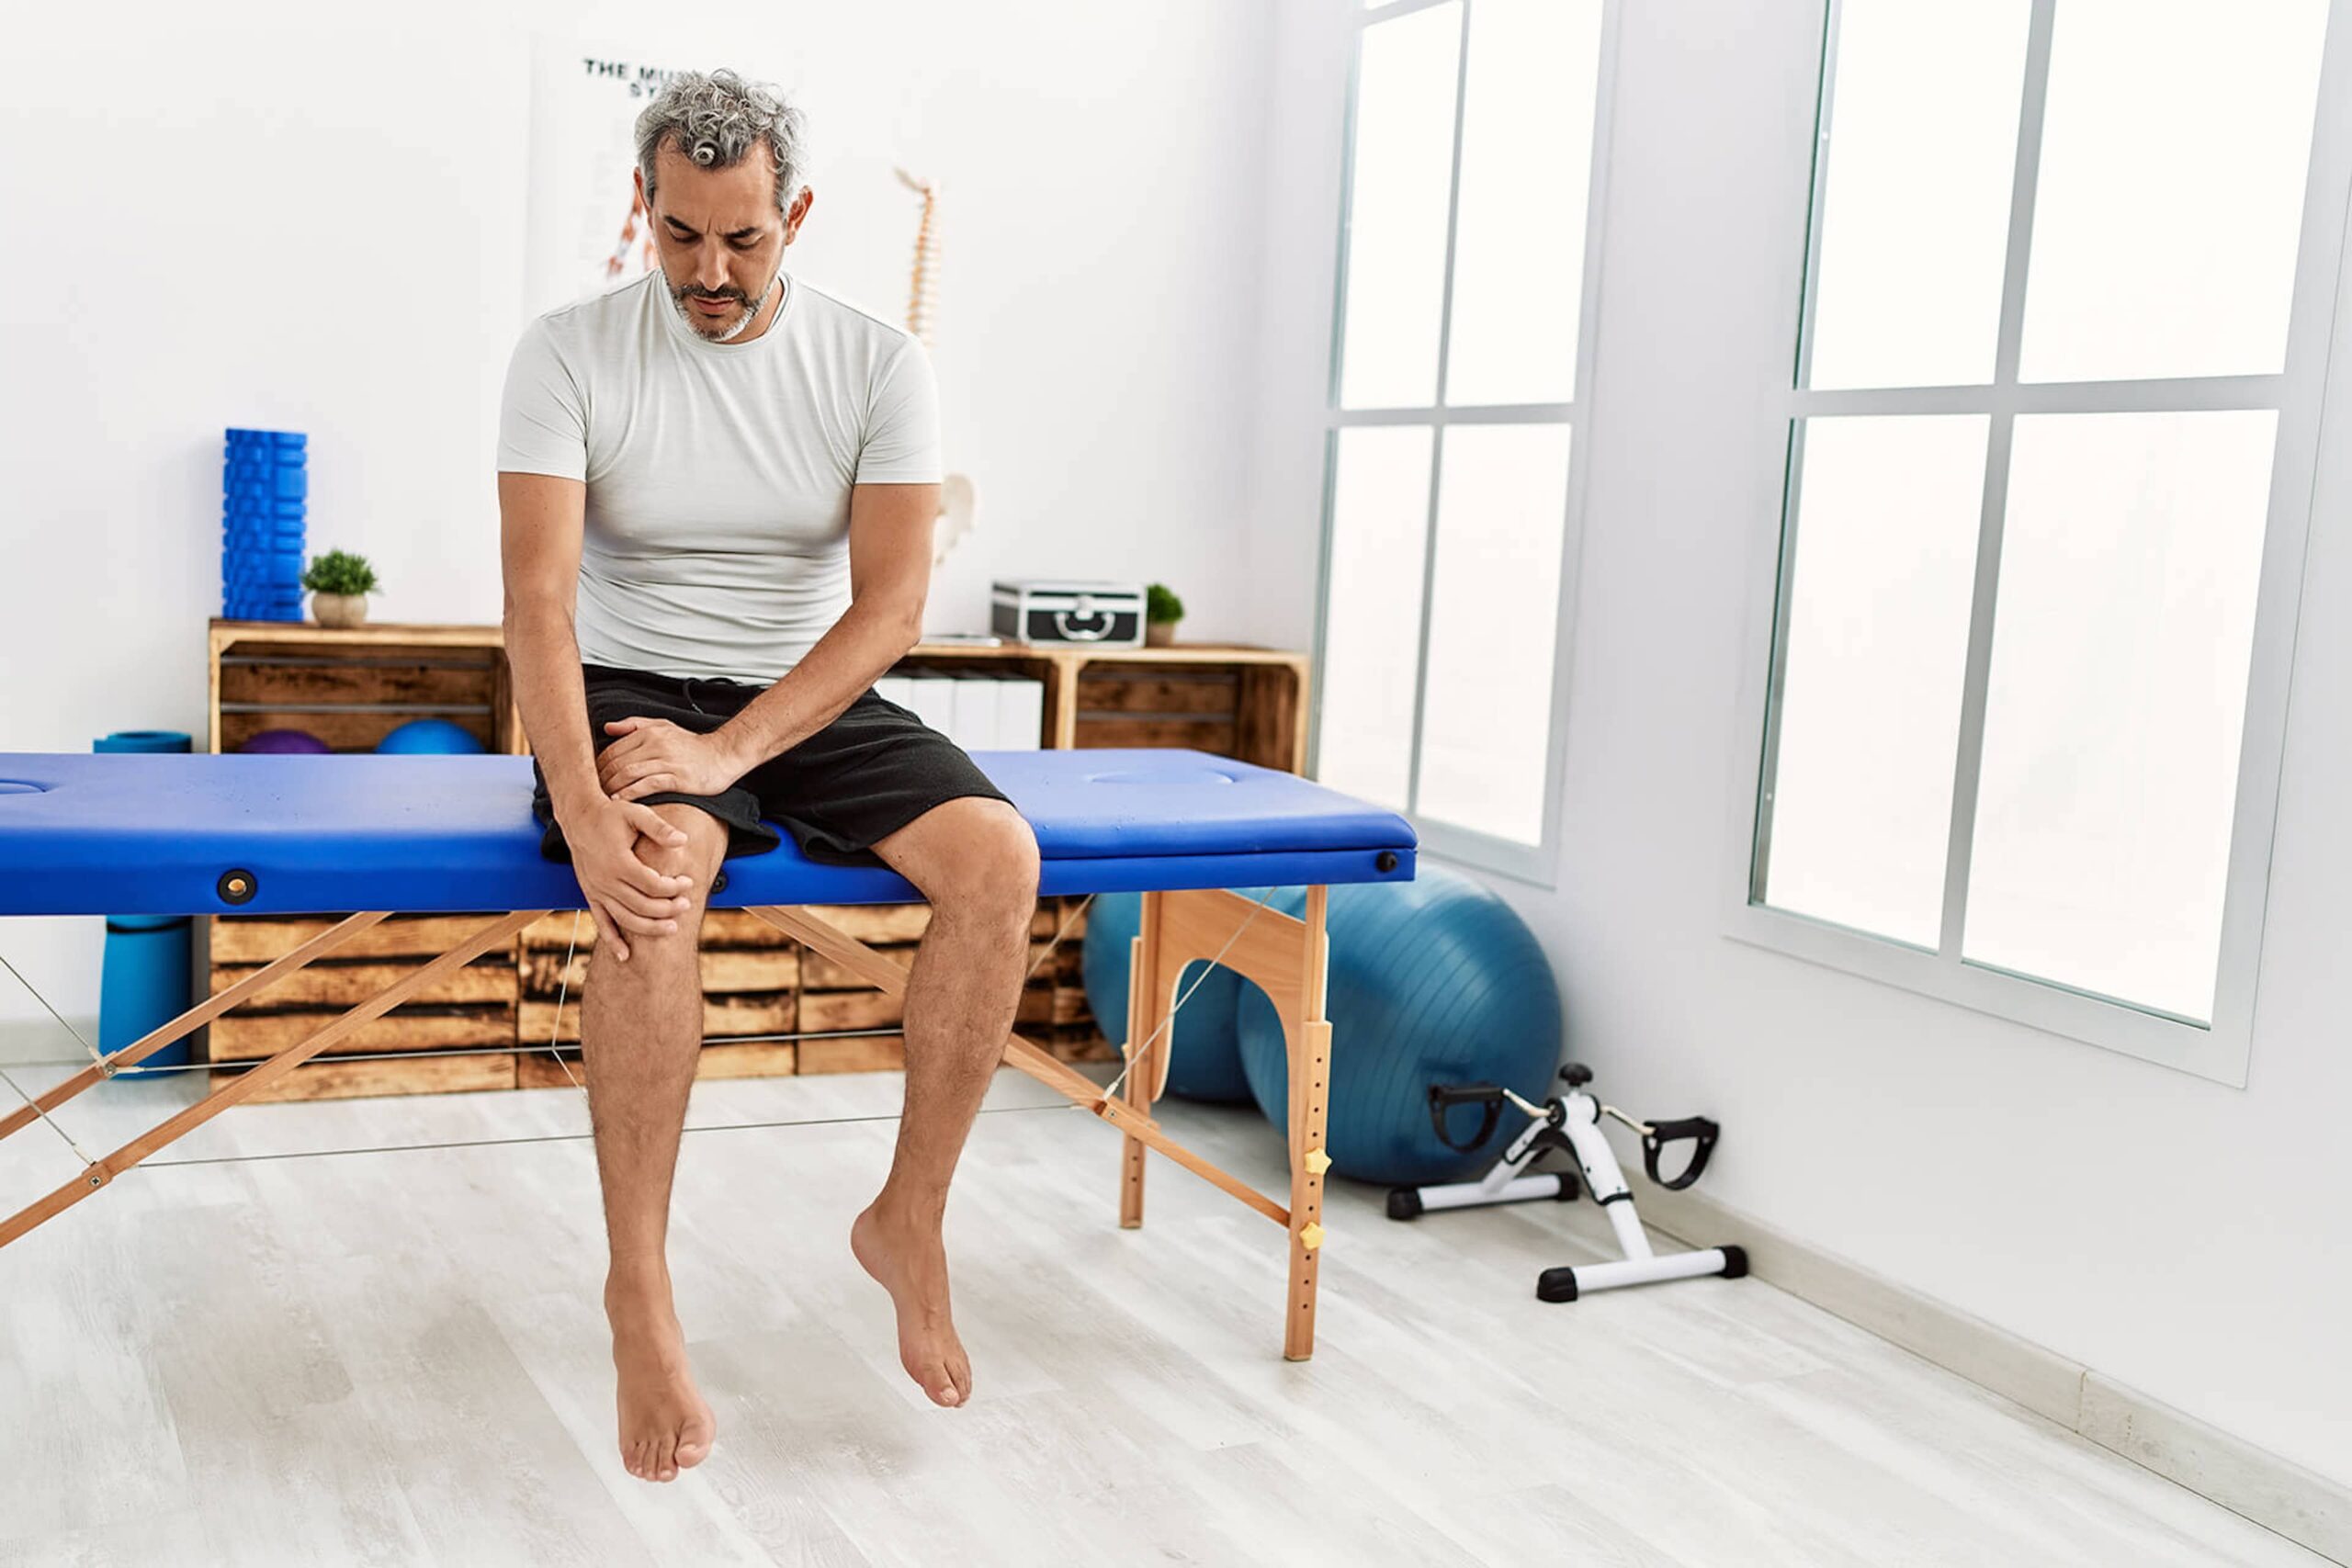 Man with curly, greying hair sits on a physical therapy table holding his knee. Dr. Goradia of G2 Orthopedics connects his patients with physical therapists prior to outpatient knee replacement surgery so they can be confident that their surgery and recovery will go well.